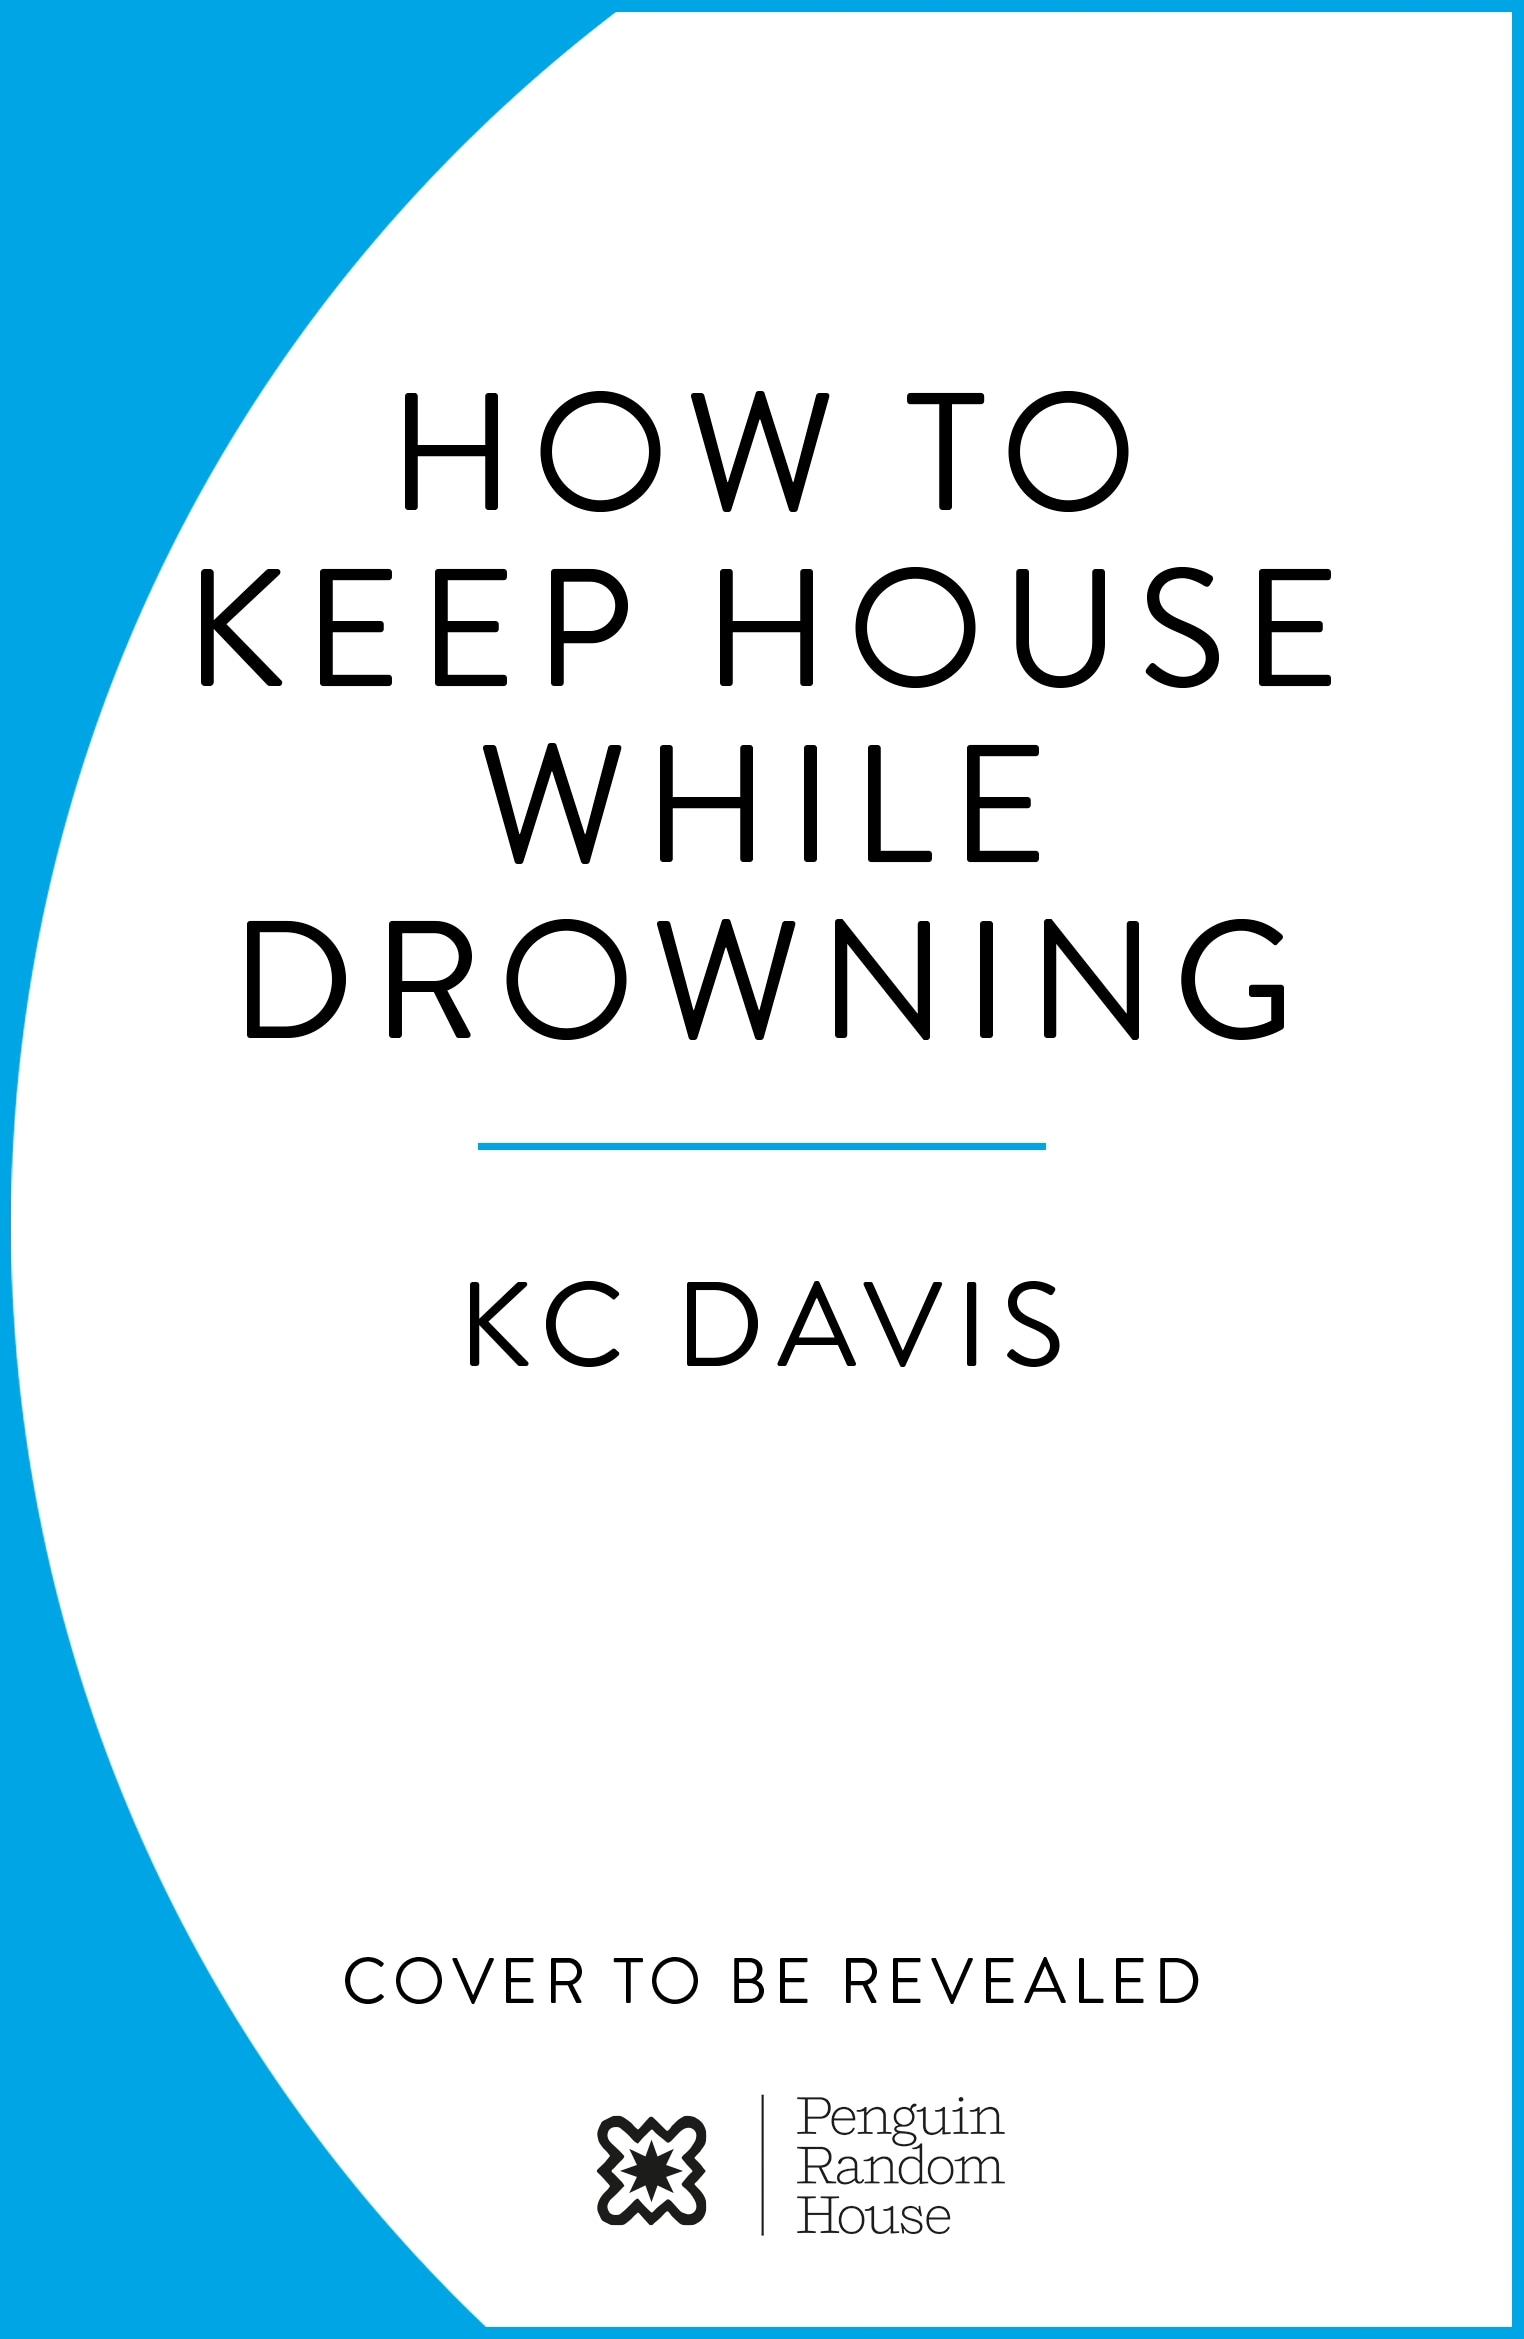 Book “How to Keep House While Drowning” by KC Davis — April 28, 2022